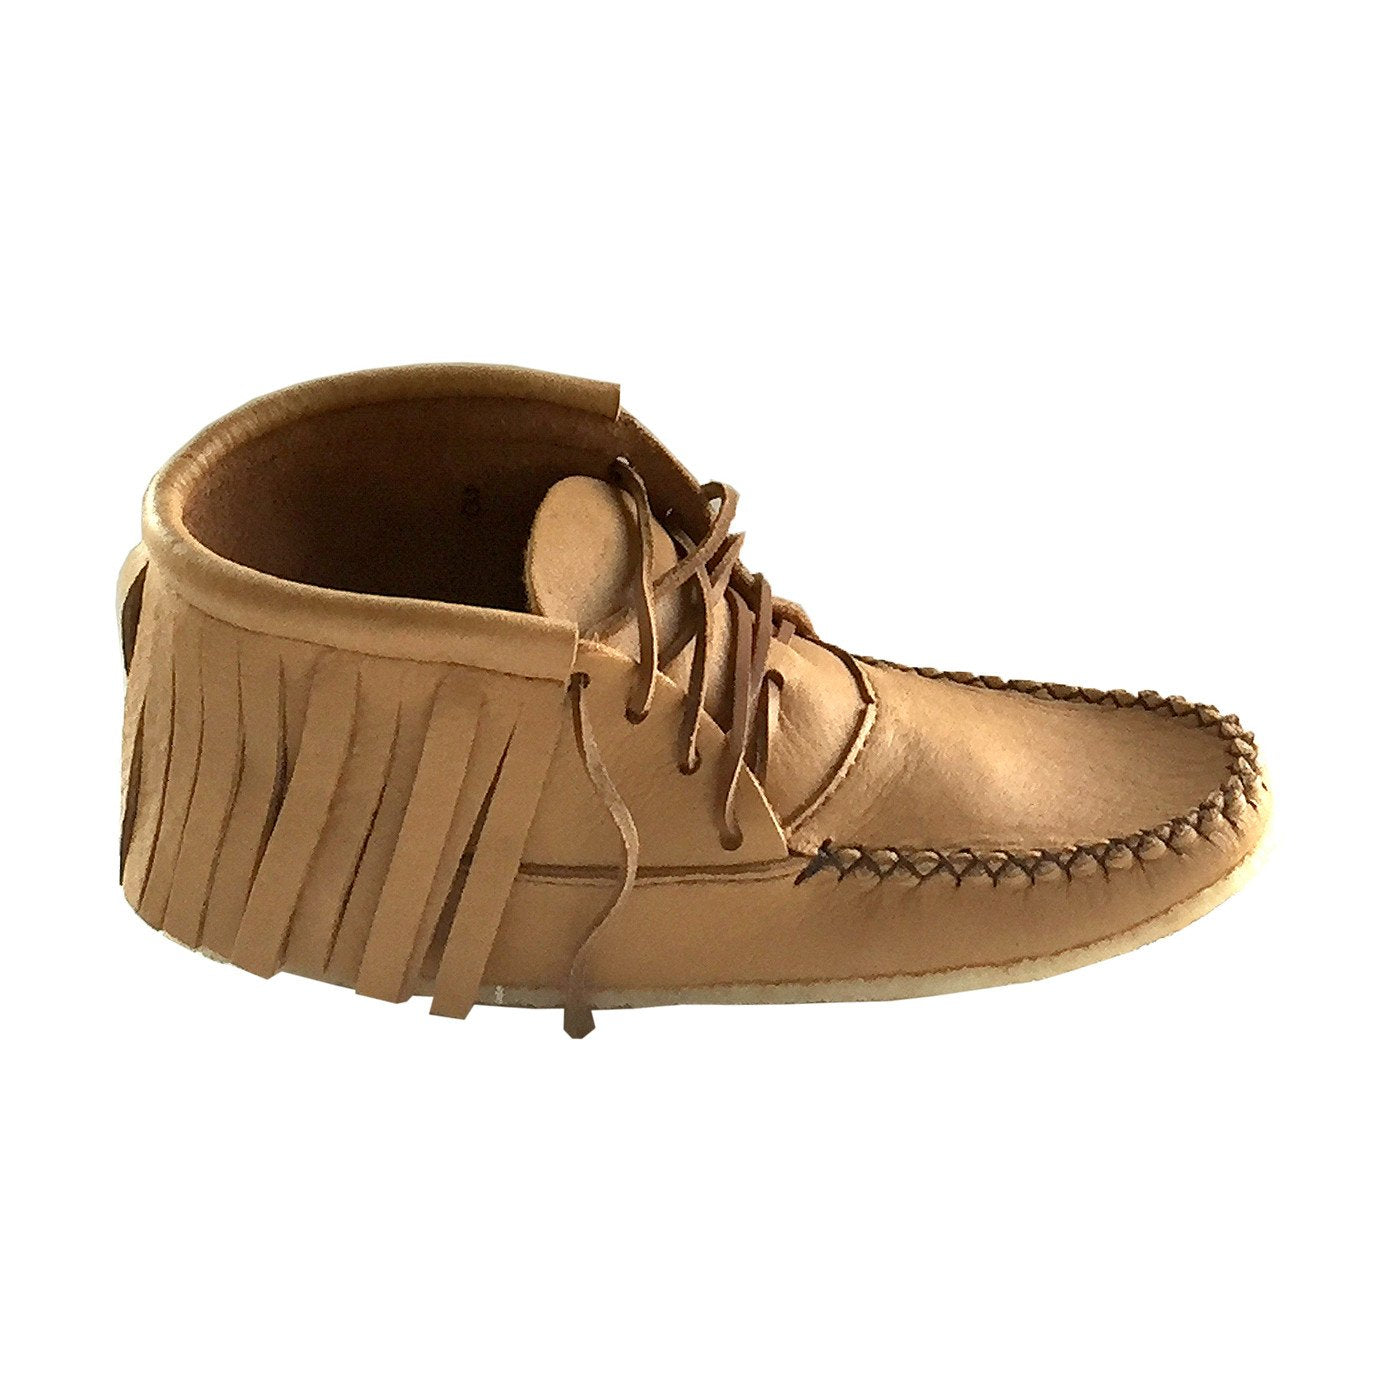 Women's Fringed Ankle Moccasin Boots